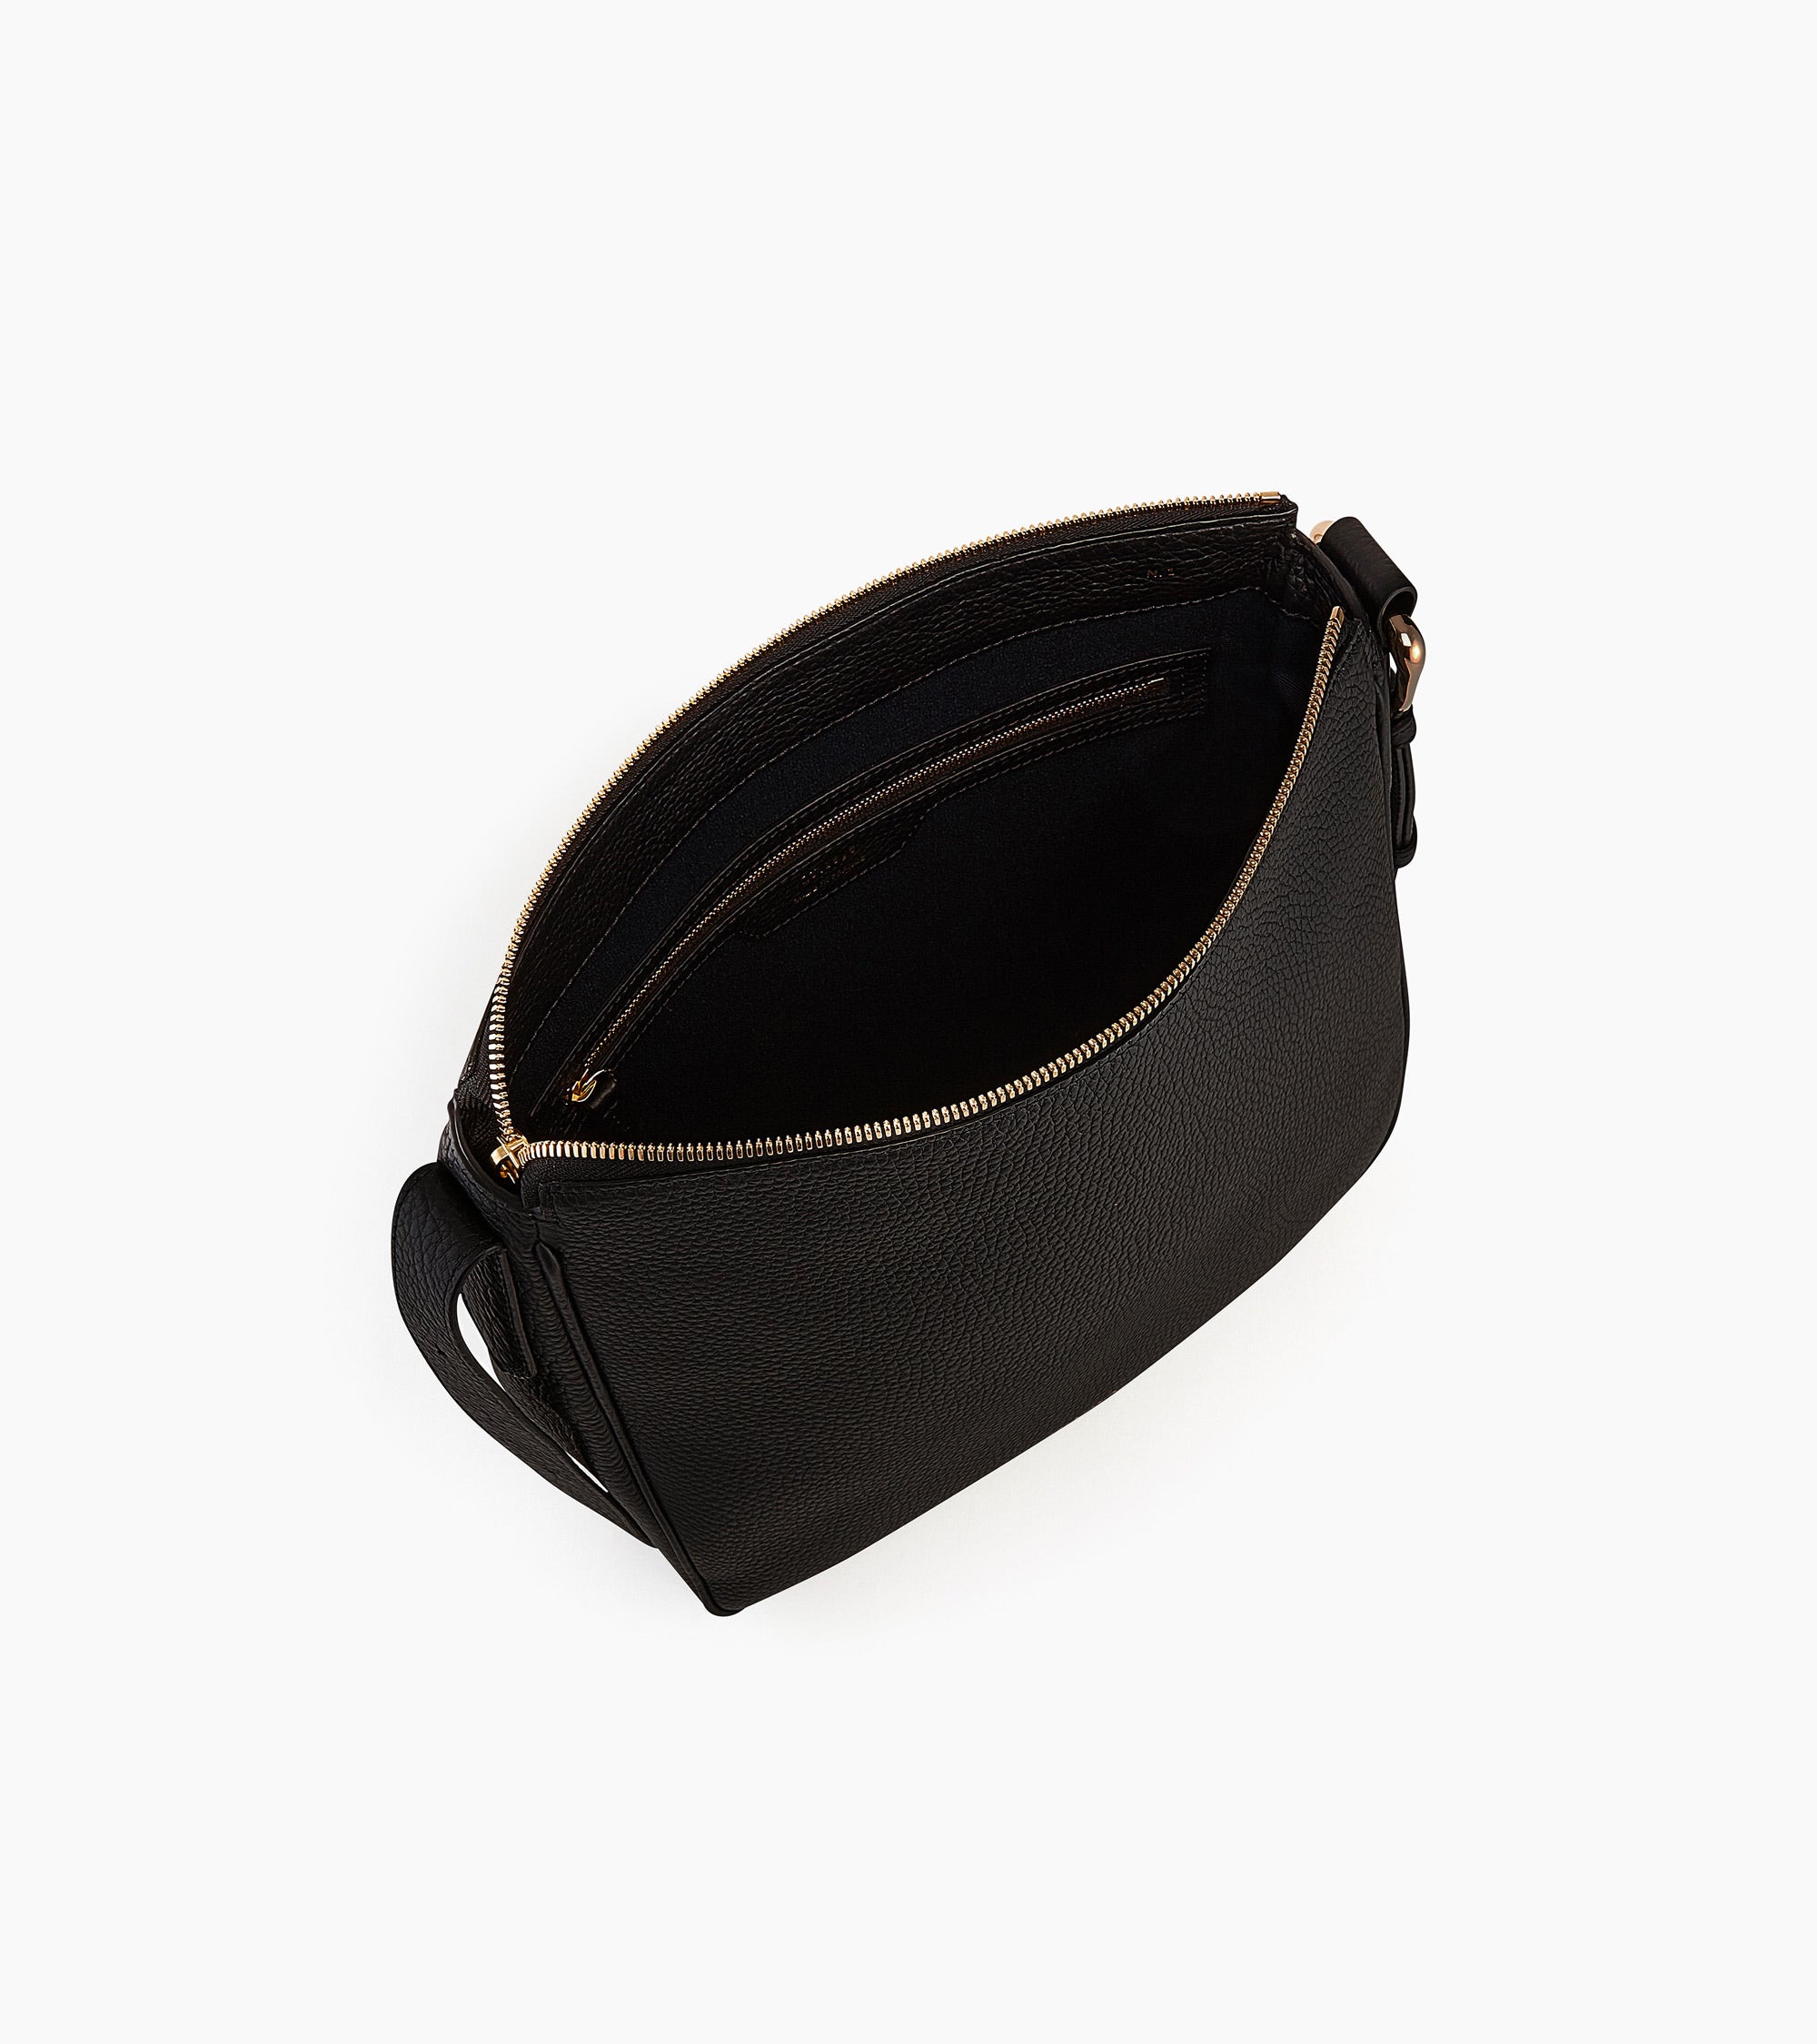 Madeleine mid-sized hobo bag in grained leather